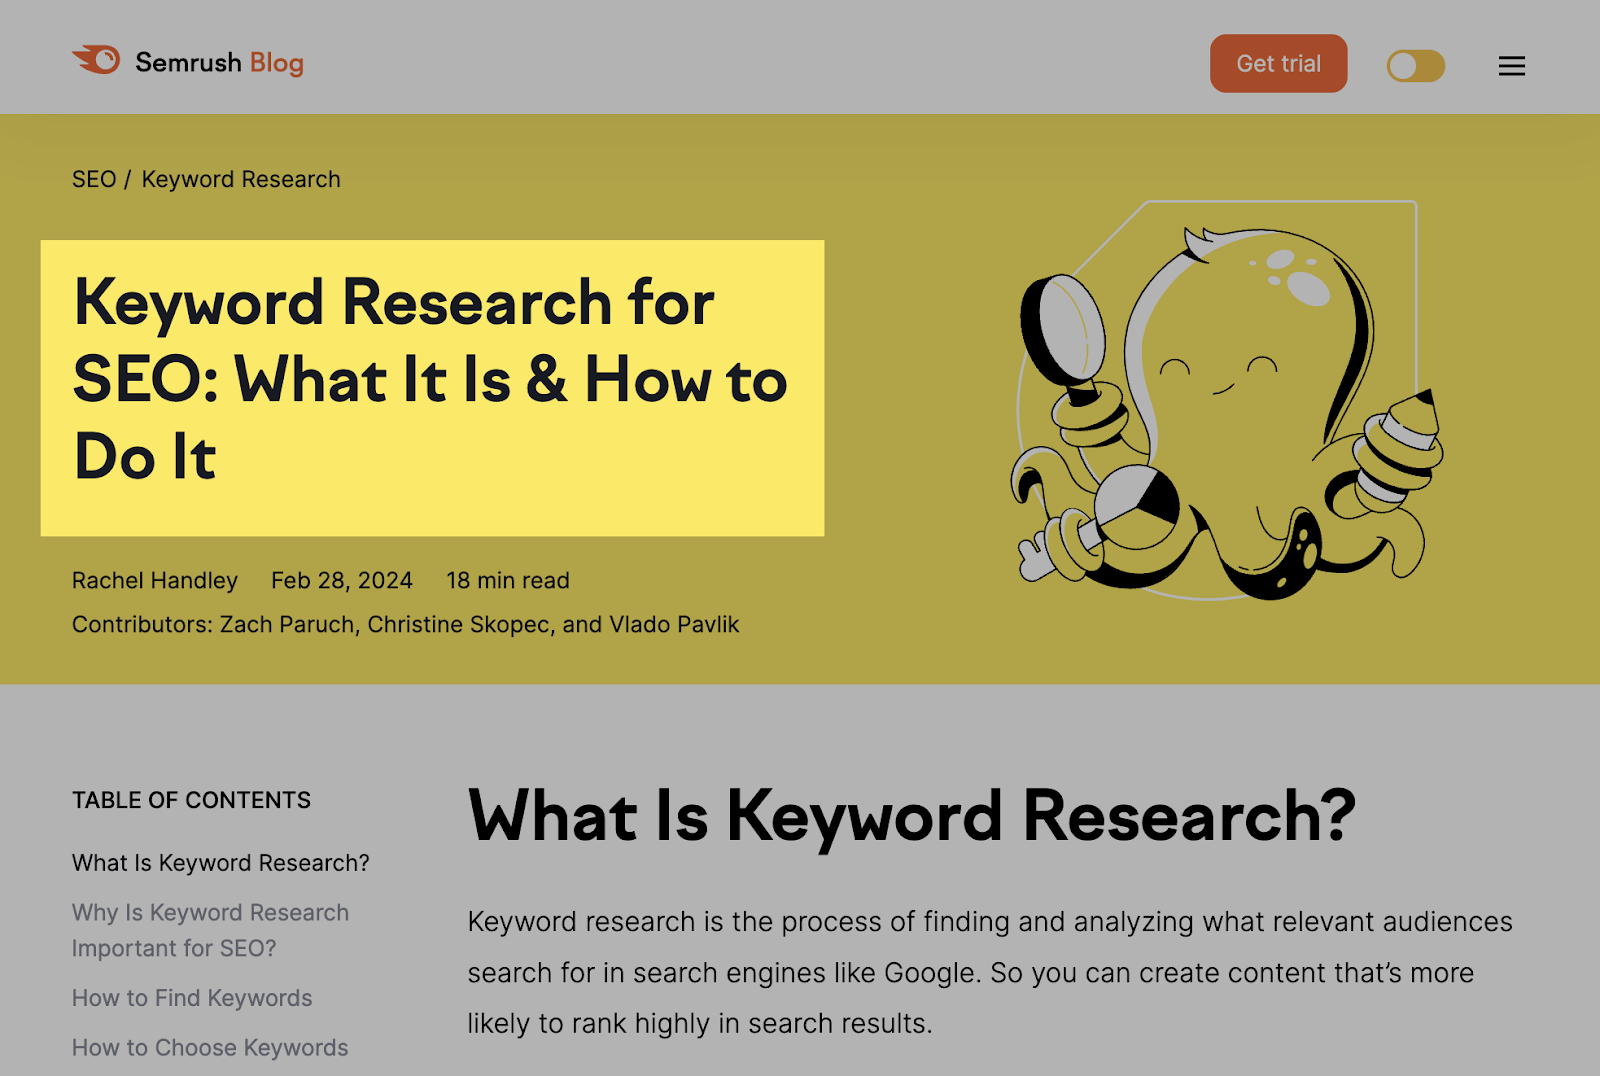 An H1 for a Semrush blog that reads: "Keyword Research for SEO: What It Is & How to Do It"